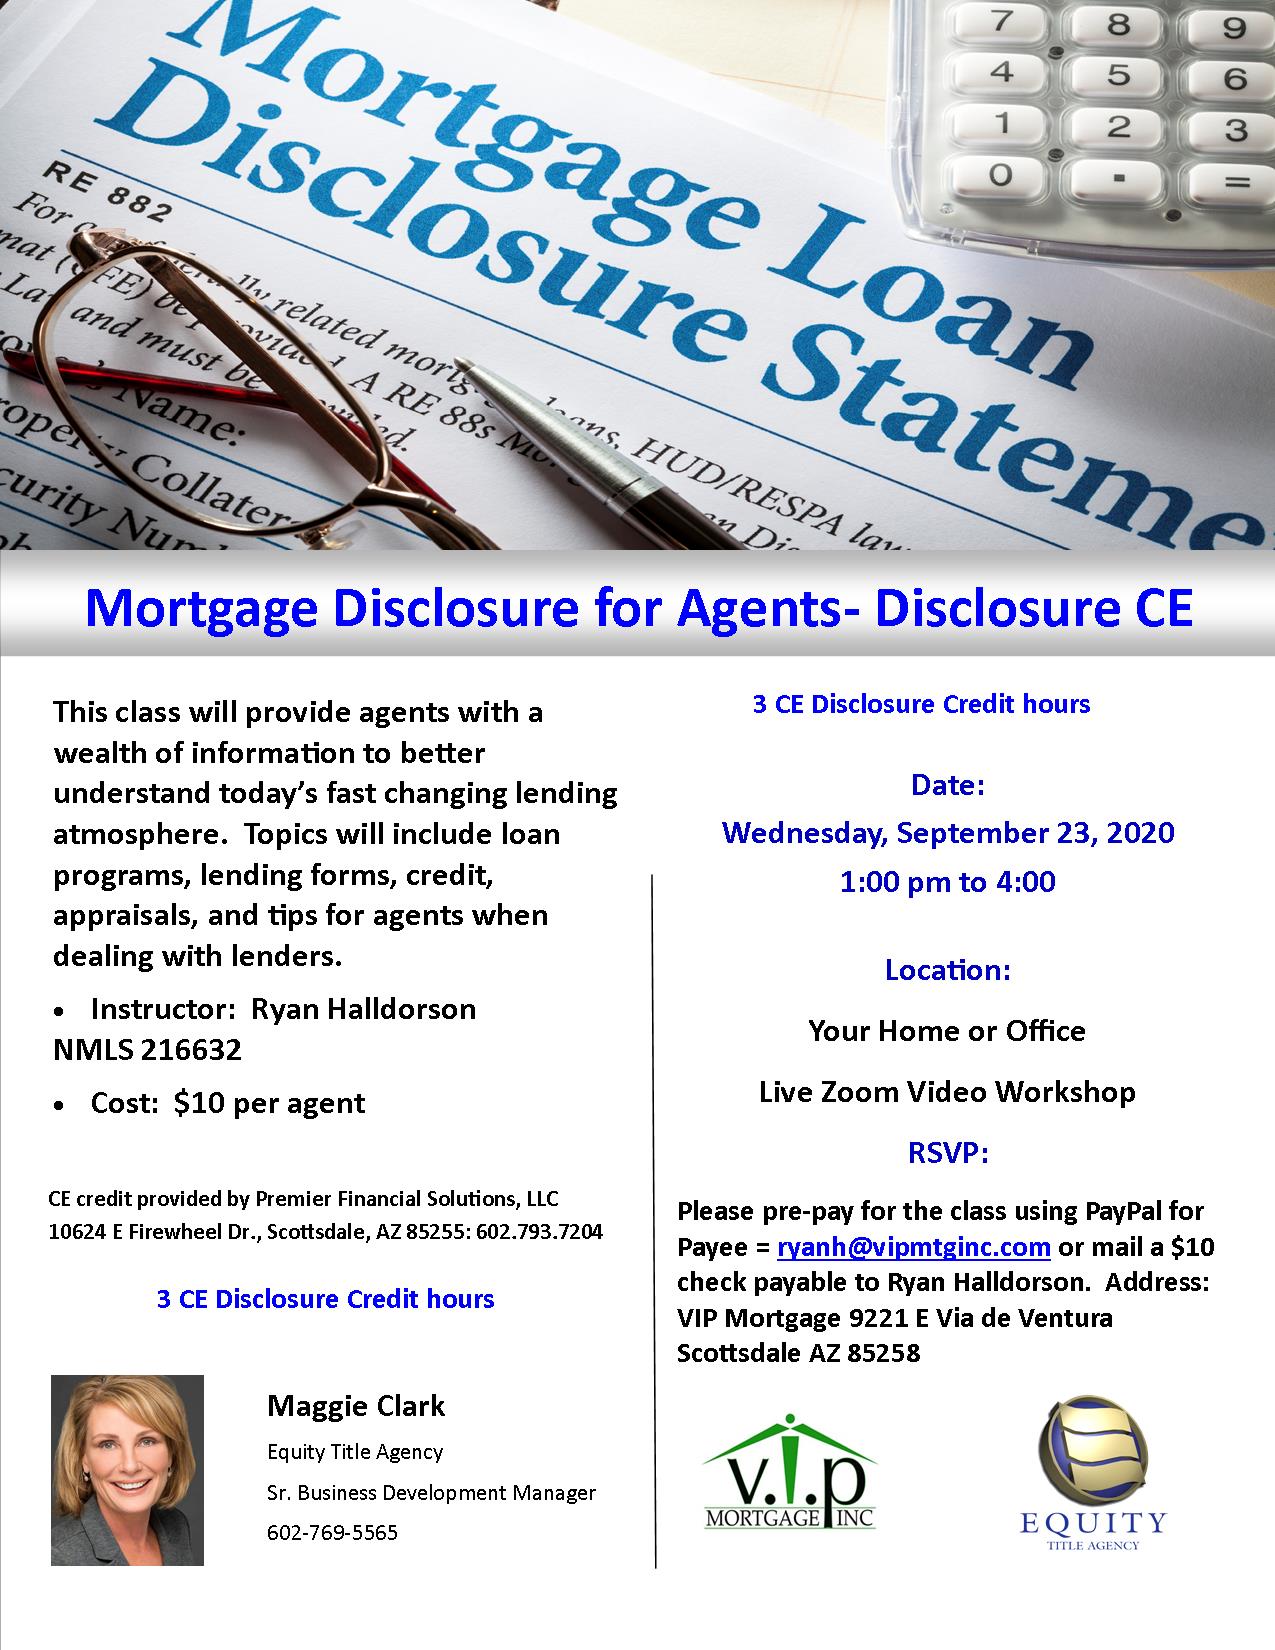 Mortgage Disclosure for Agents CE Class